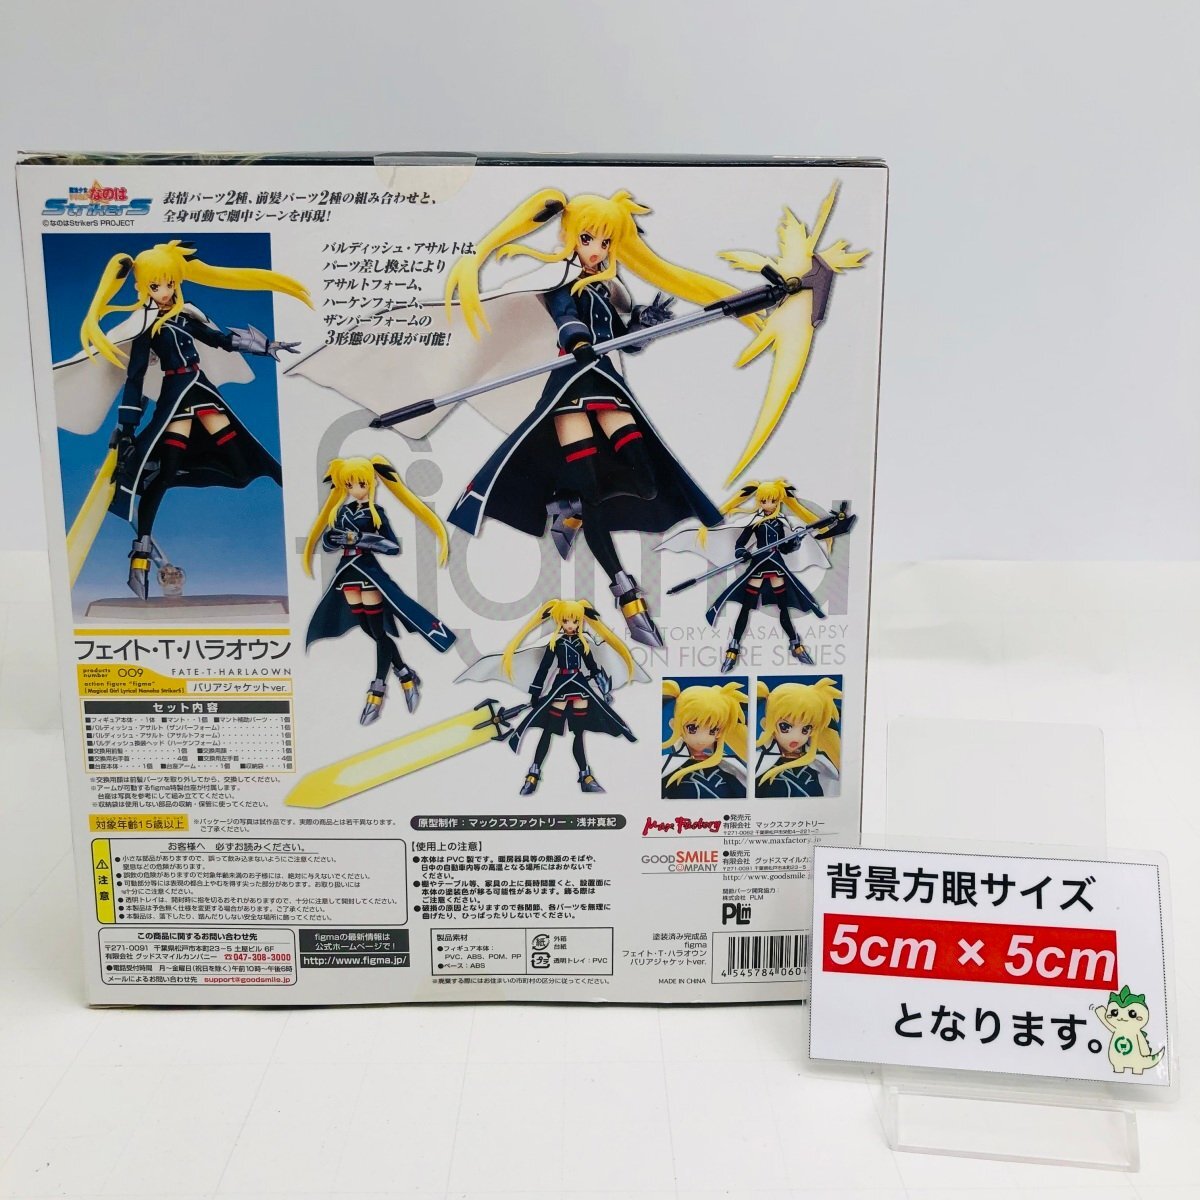  new goods unopened Max Factory figma Magical Girl Lyrical Nanoha feitoT is Raoh n burr a jacket ver